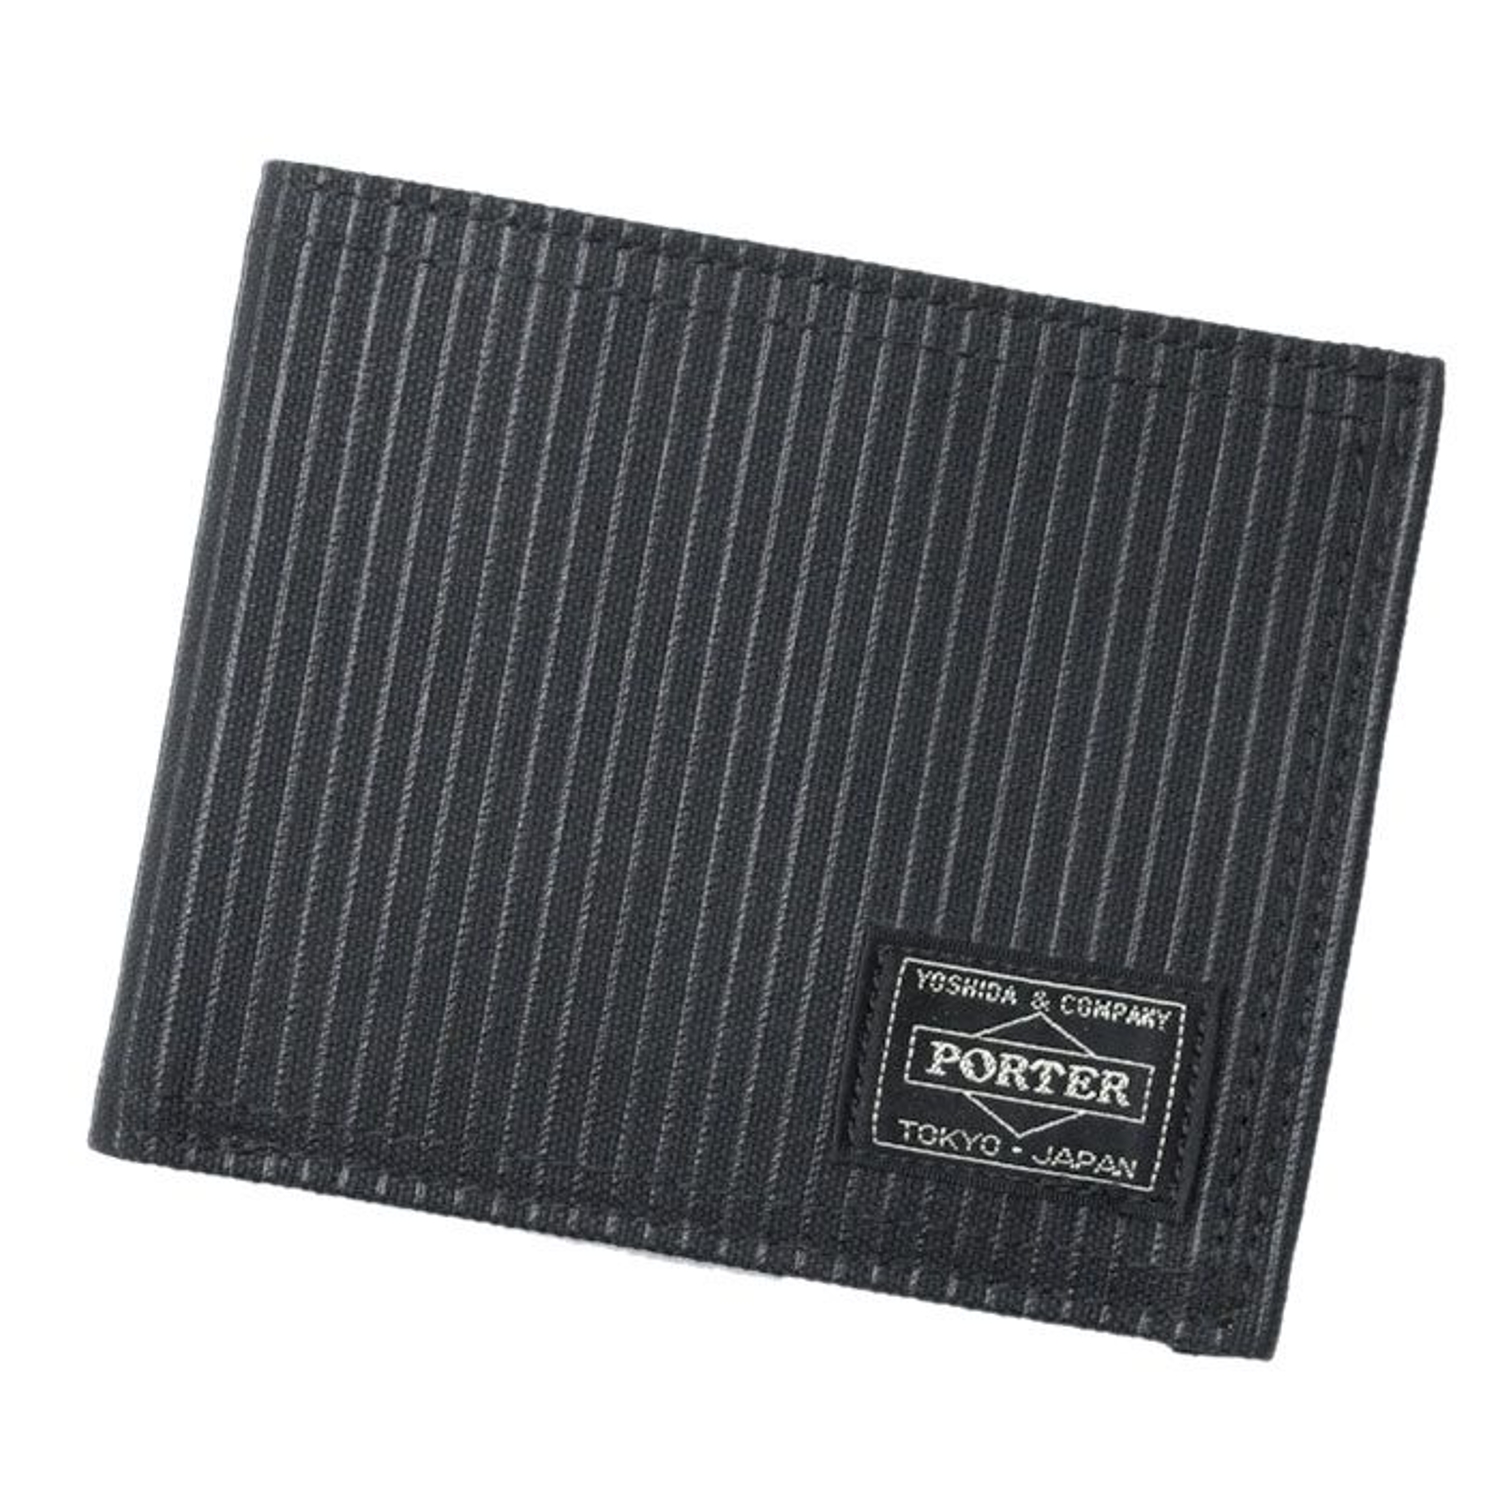 PORTER / DRAWING / WALLET (102391)